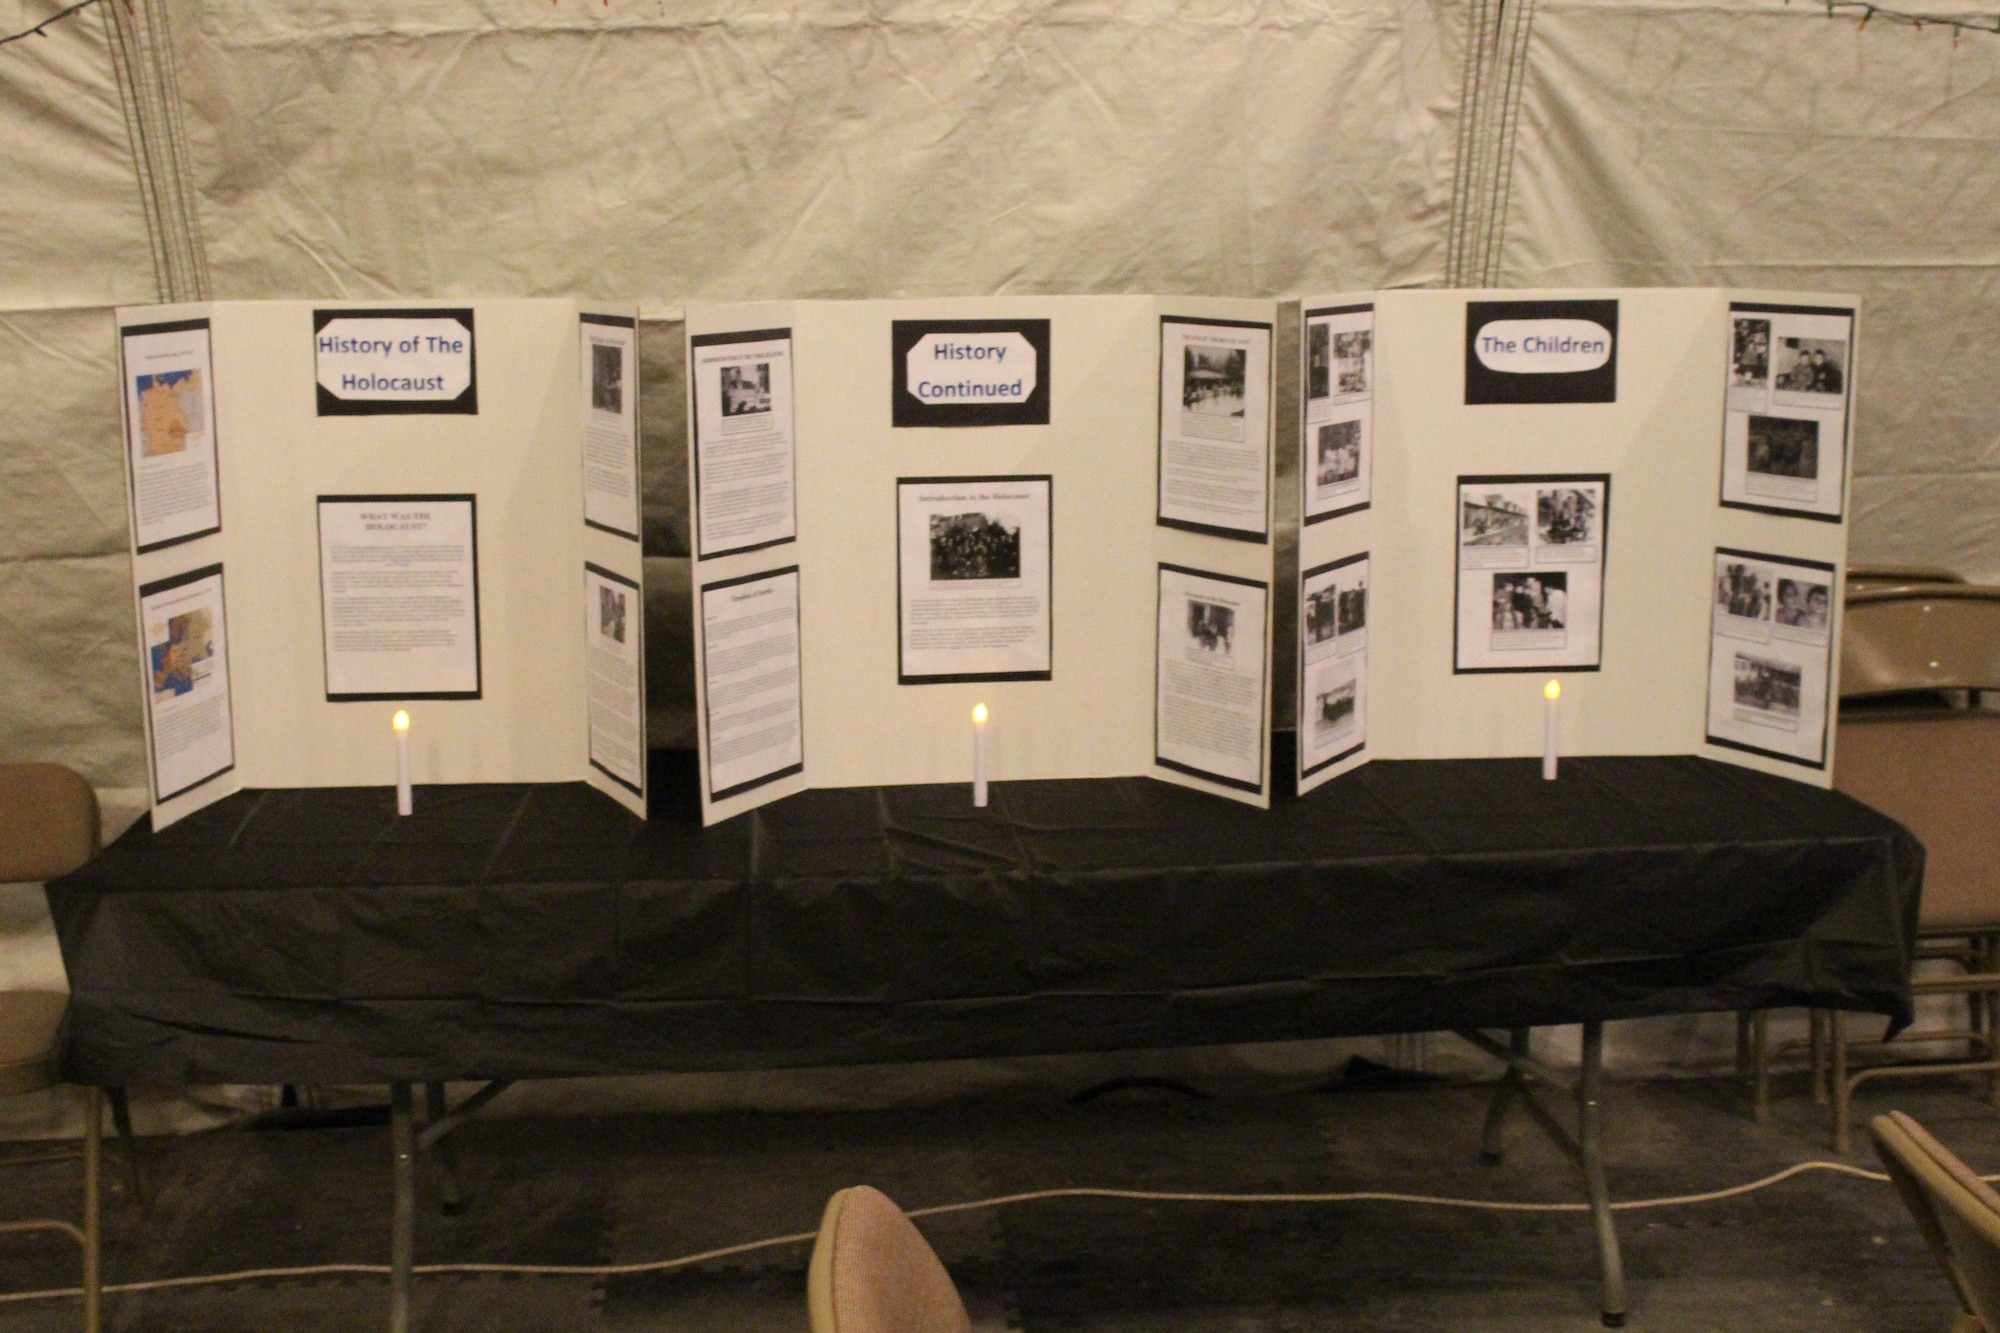 Informational boards sit in a museum during a Holocaust remembrance event April 27, 2017 in Southwest Asia.  The event also featured a remembrance walk and educated over 100 people. (U.S. Air Force Photo by Tech Sgt. Eboni Reams)